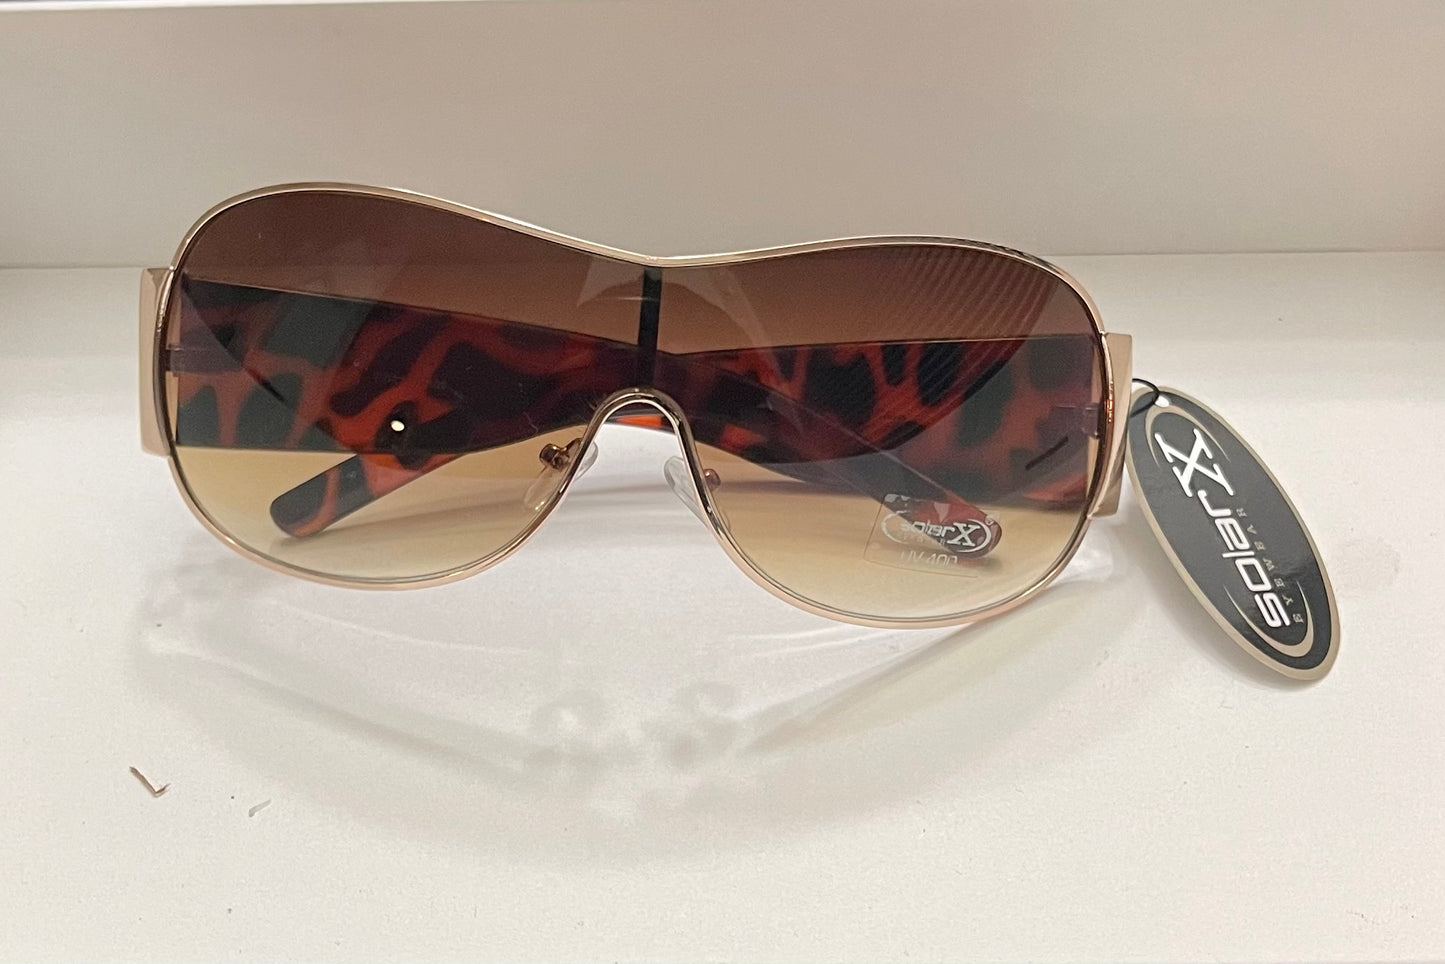 Sunglasses 8381 brown and black